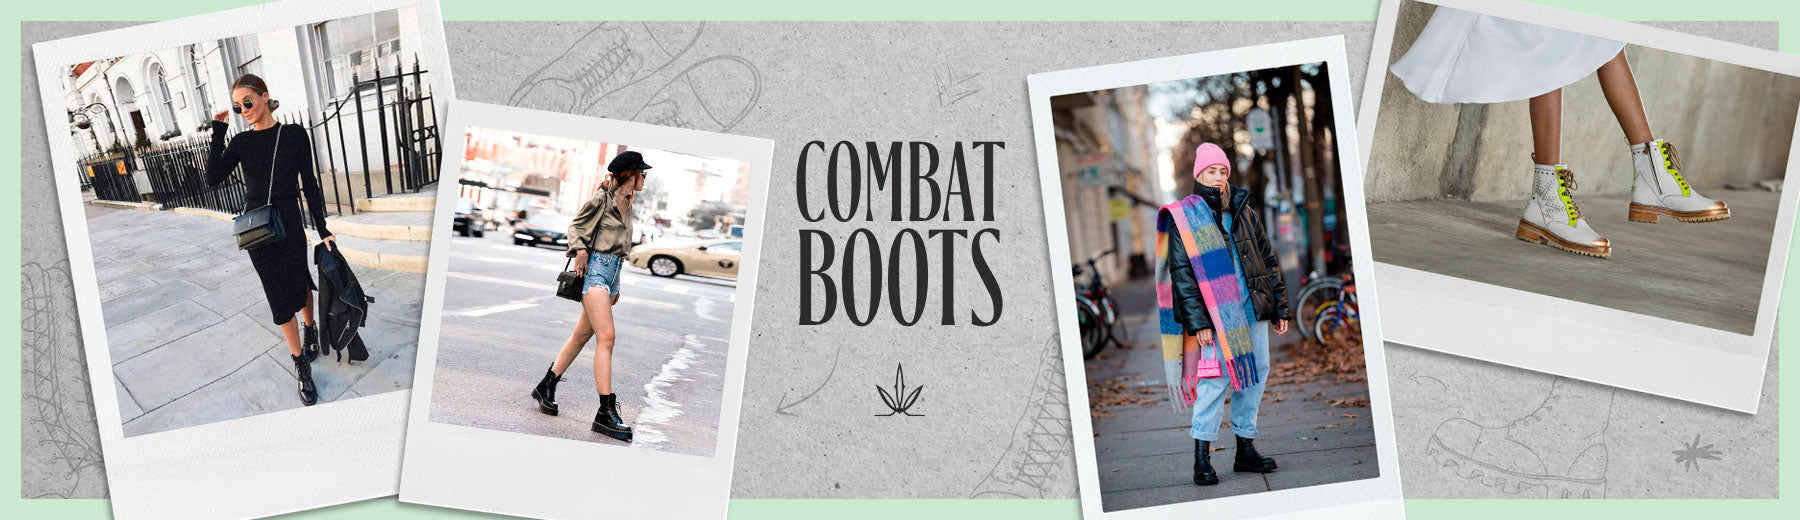 Ideas de Outfits con Combat Boots para Mujer